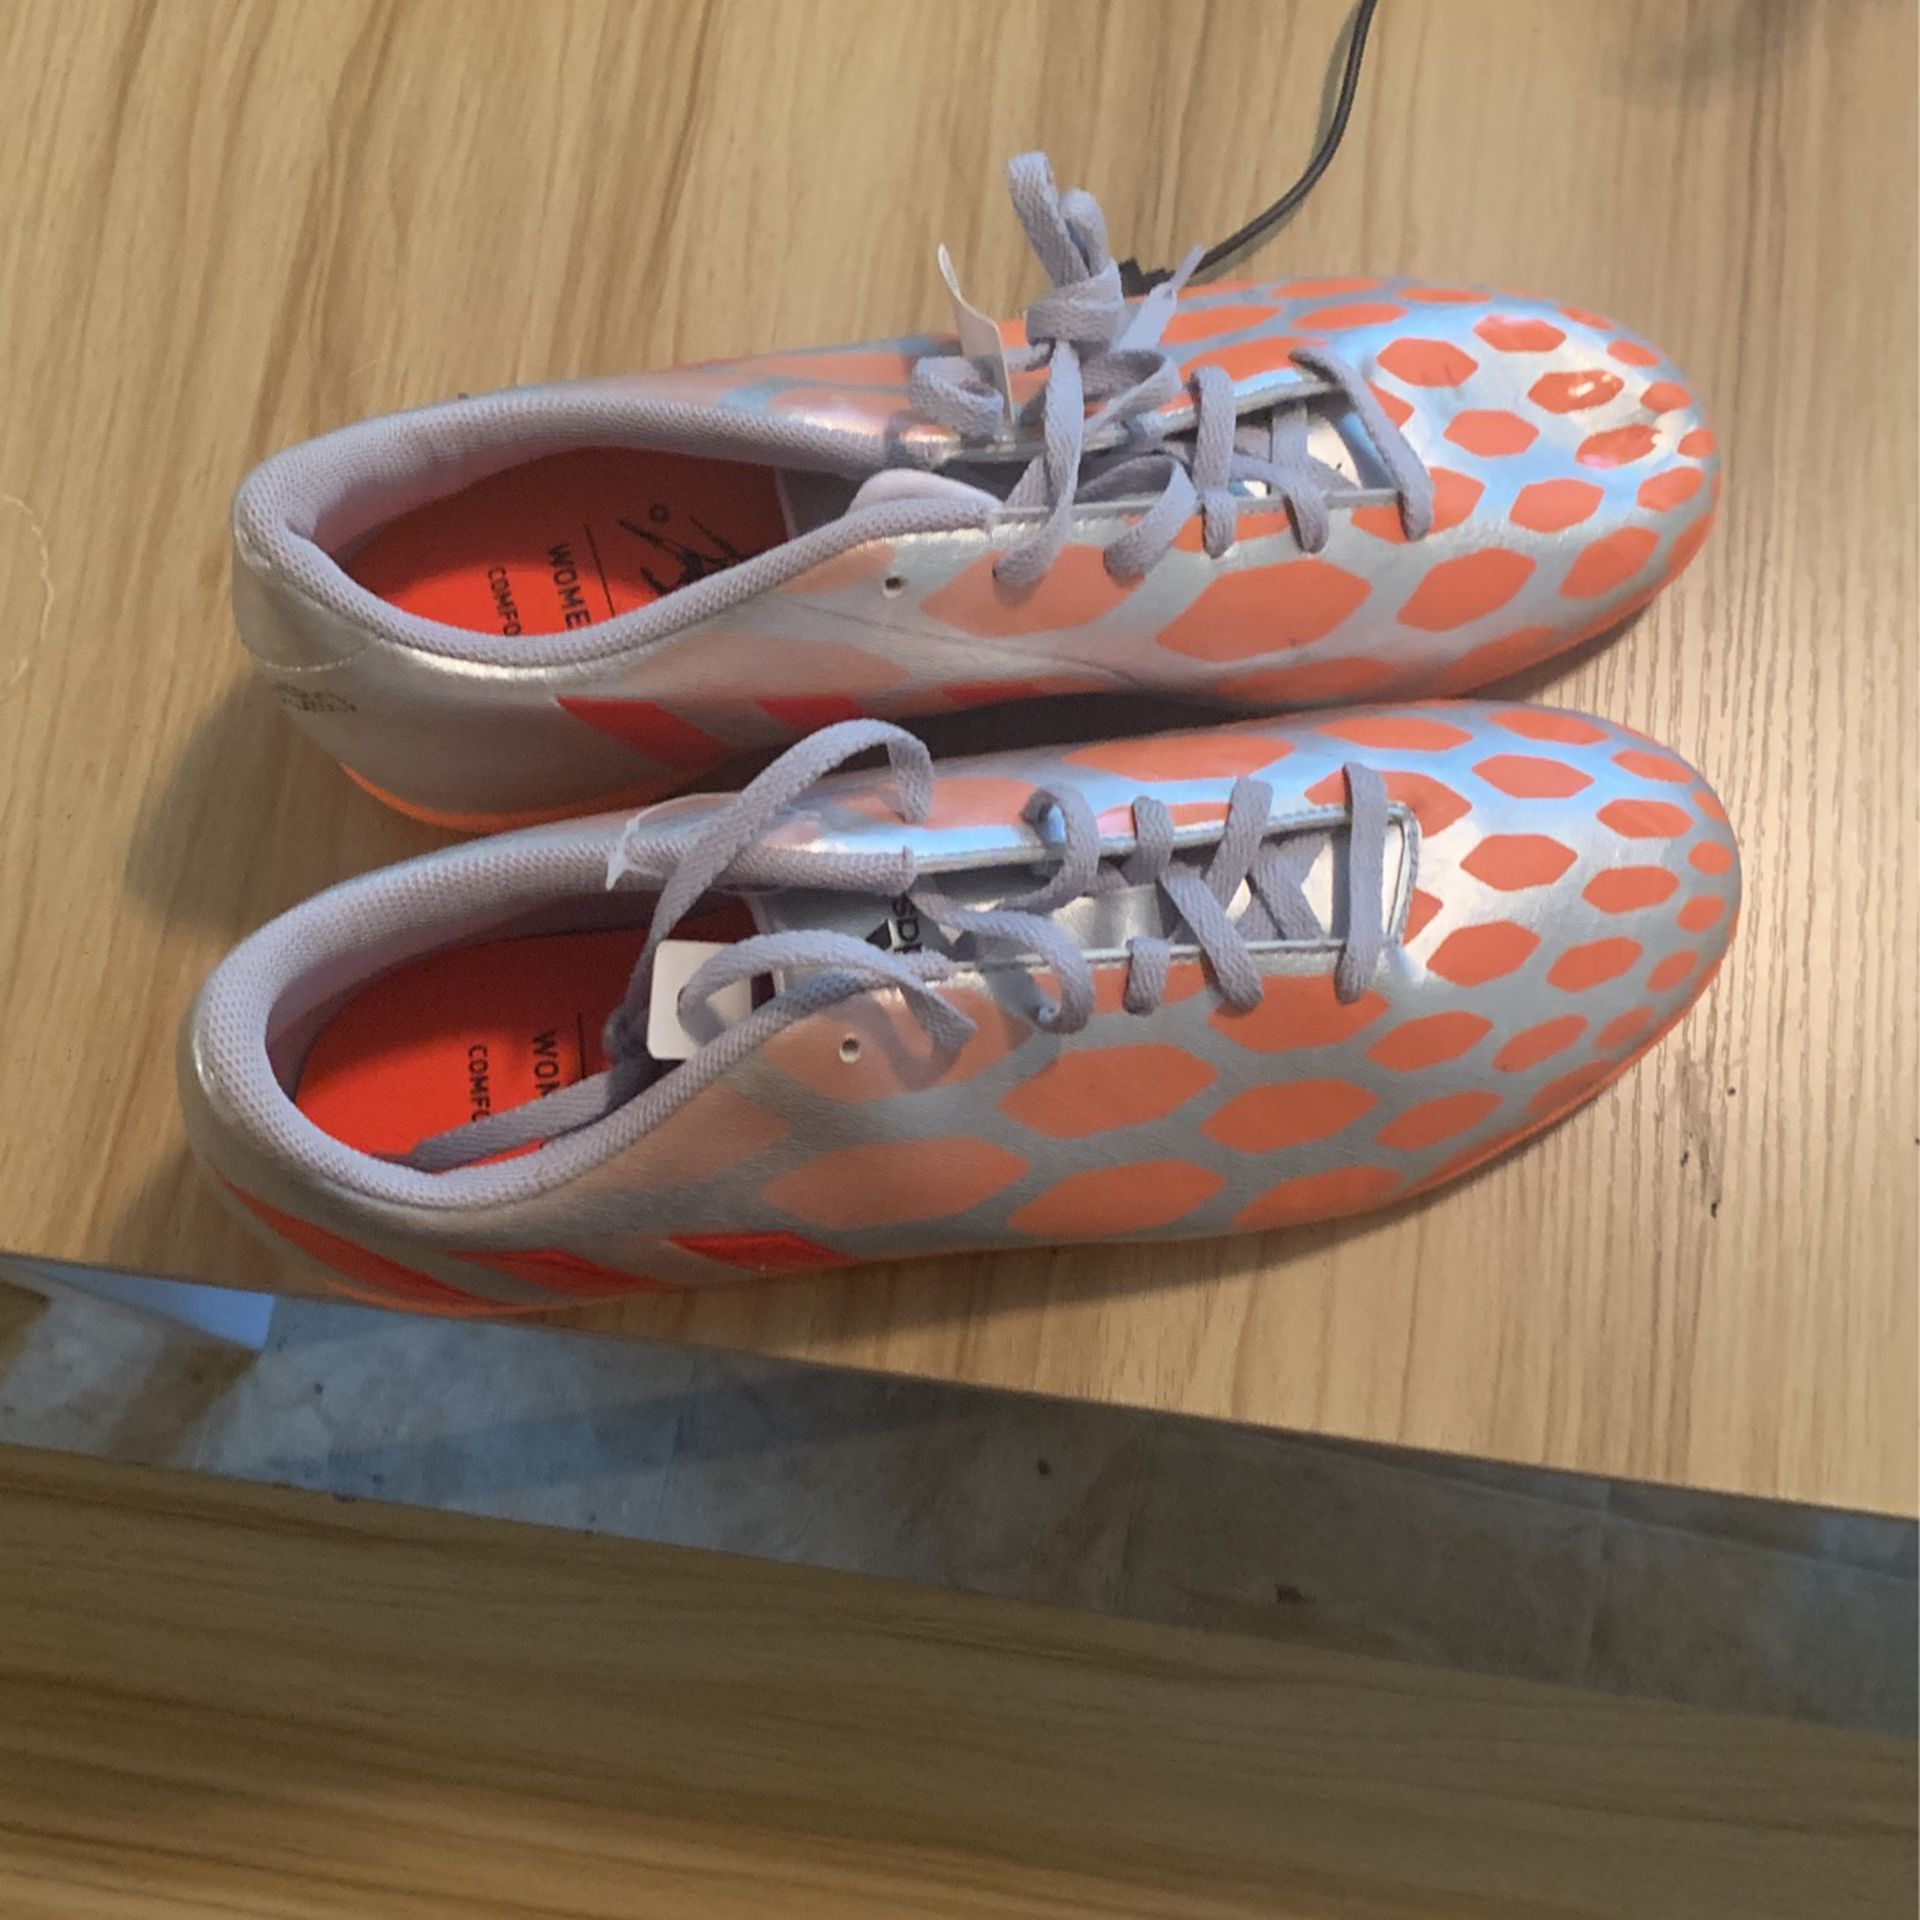 Adidas’s Women Soccer Shoes 